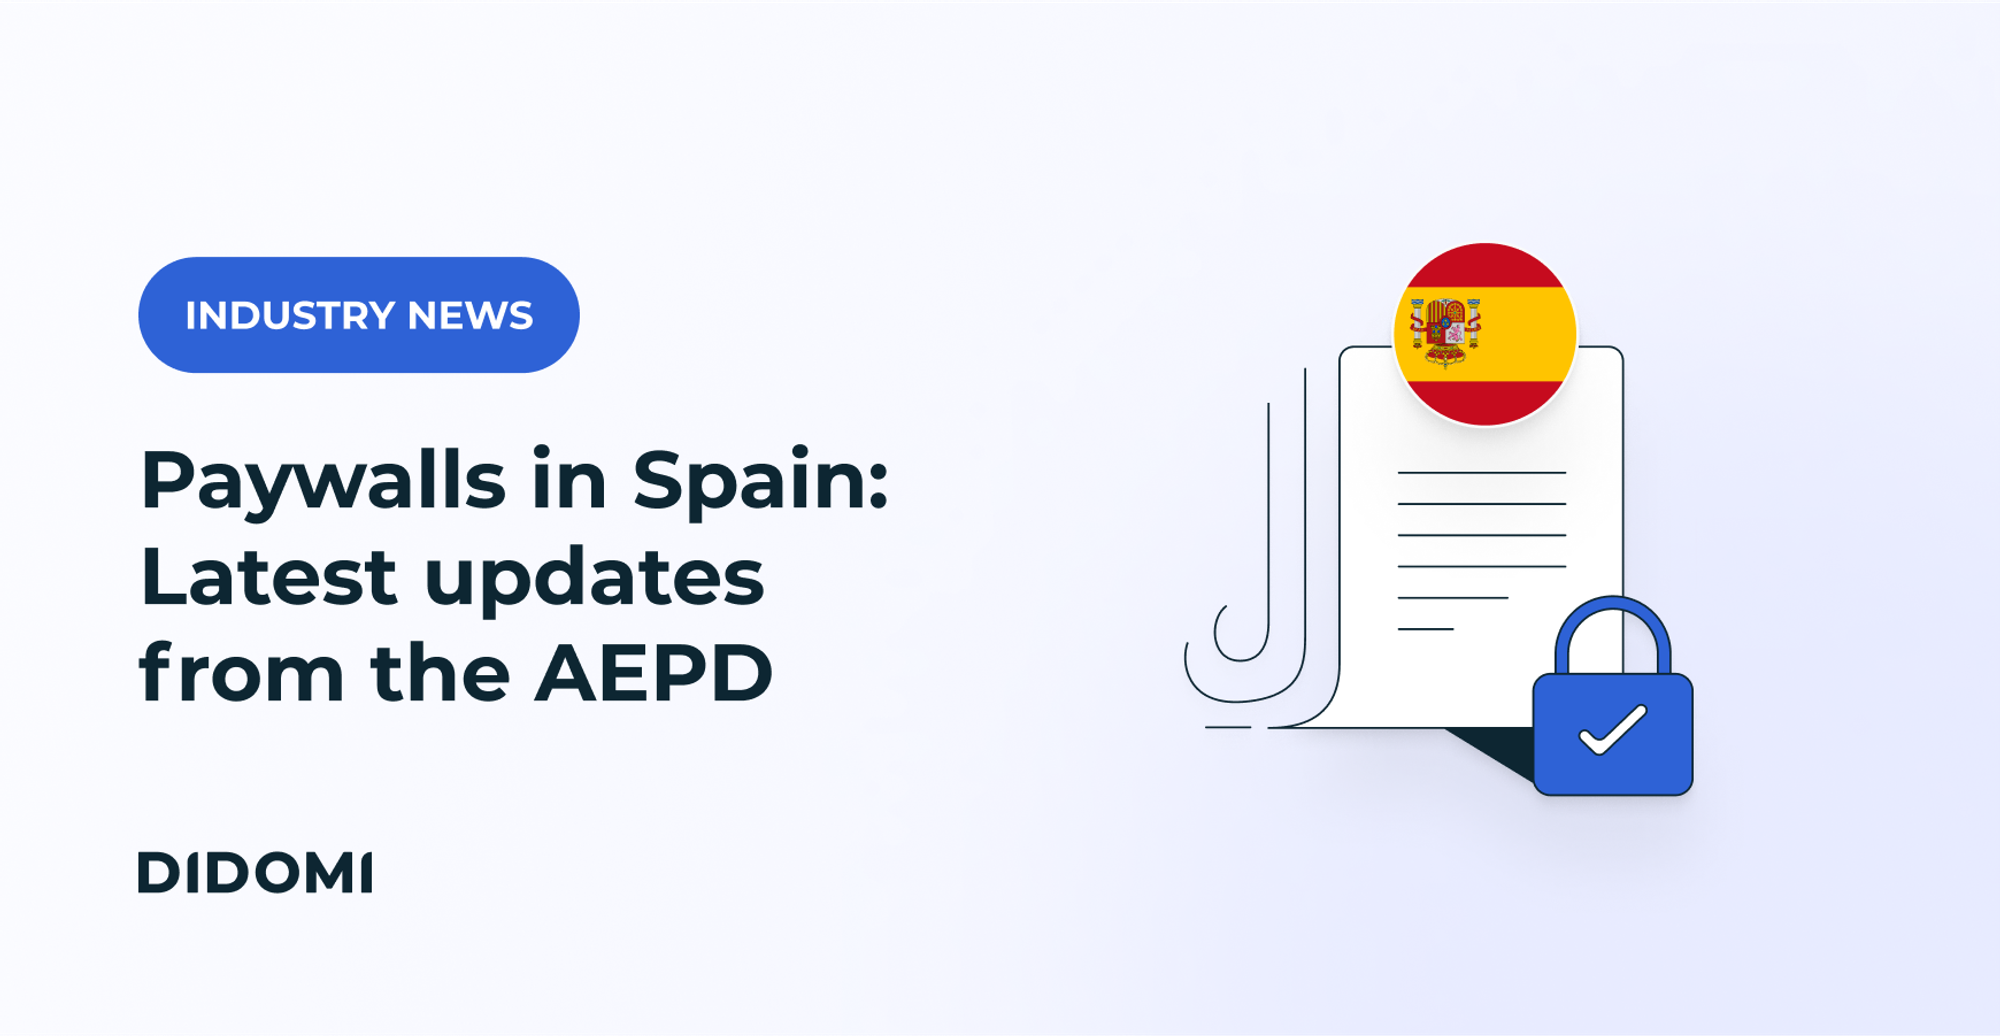 A drawing of a stack of paper with a spanish flag on it, and the title "Paywalls in Spain: Latest updates from the AEPD" accompanied by the label "Industry news"